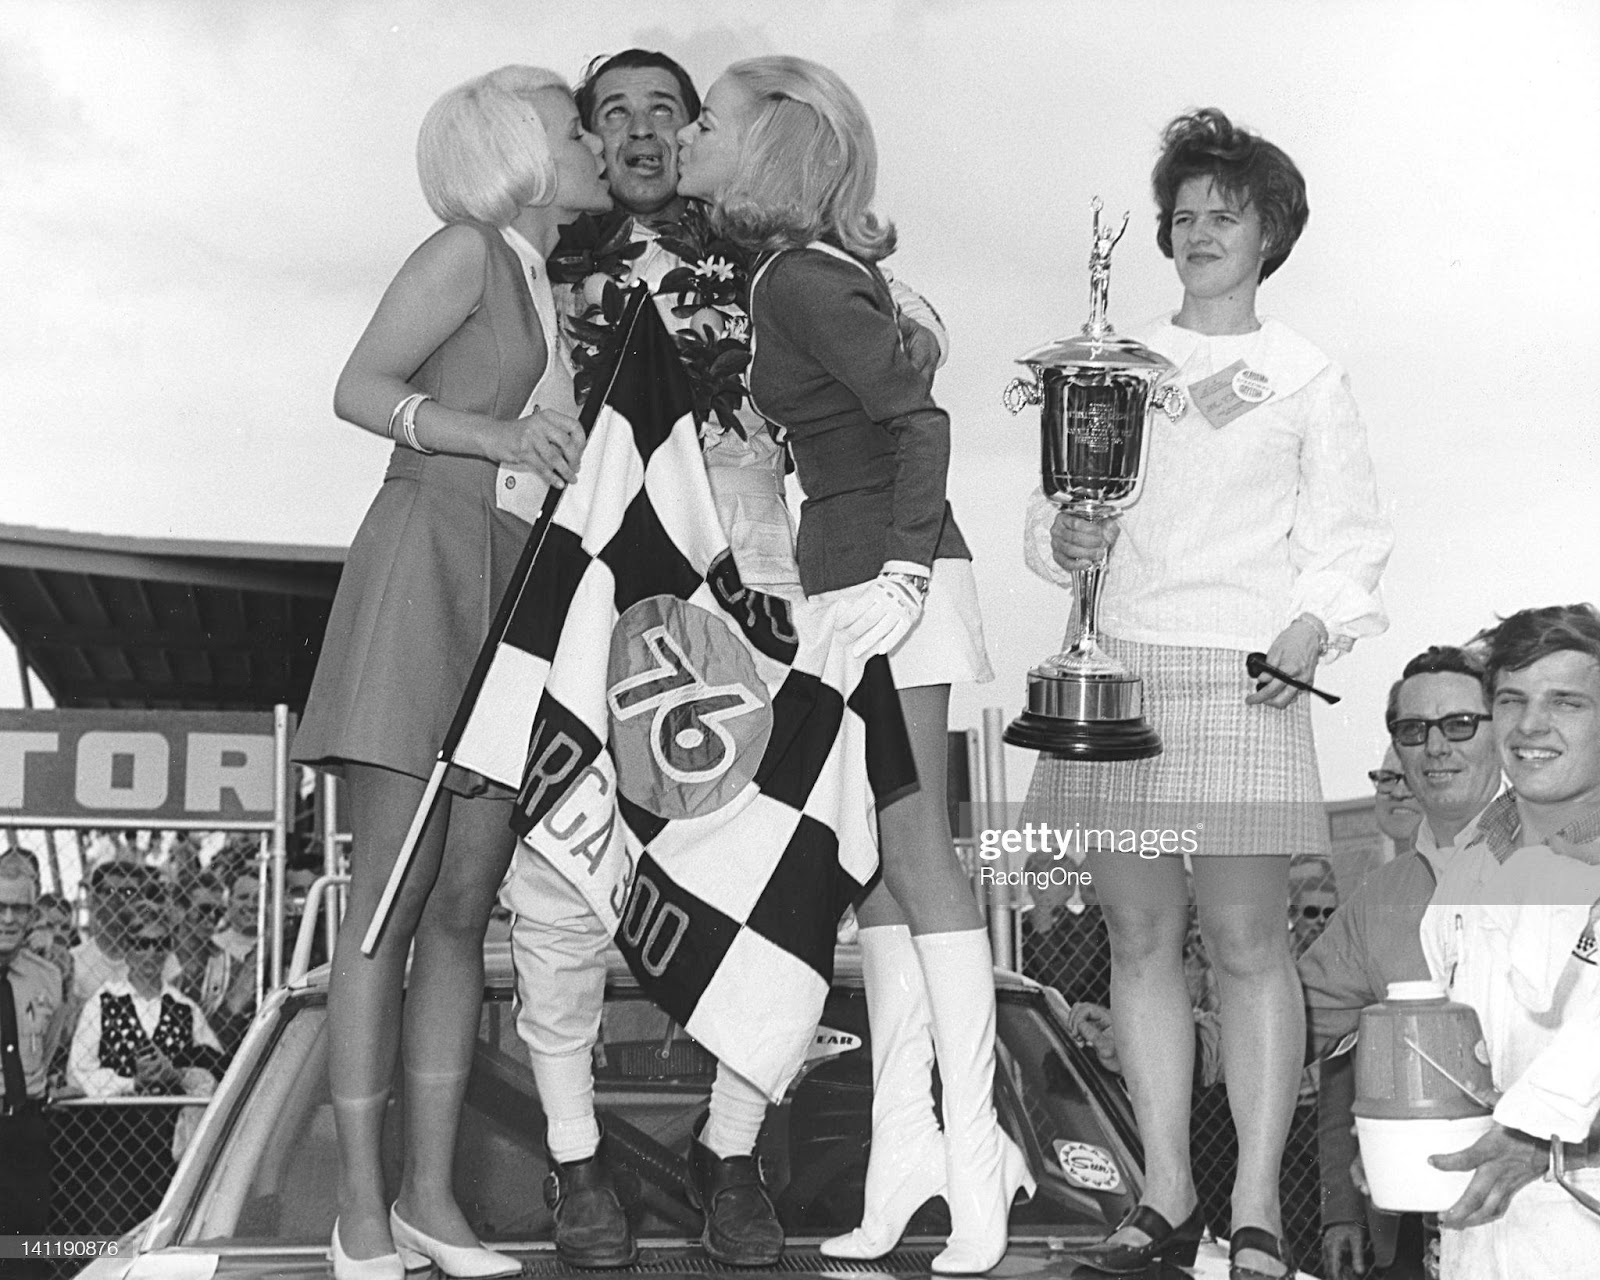 D:\Documenti\posts\posts\Women and motorsport\foto\Getty e altre\february-15-1970-ramo-stott-reacts-to-a-doublewhammy-of-kisses-from-picture-id141190876.jpg